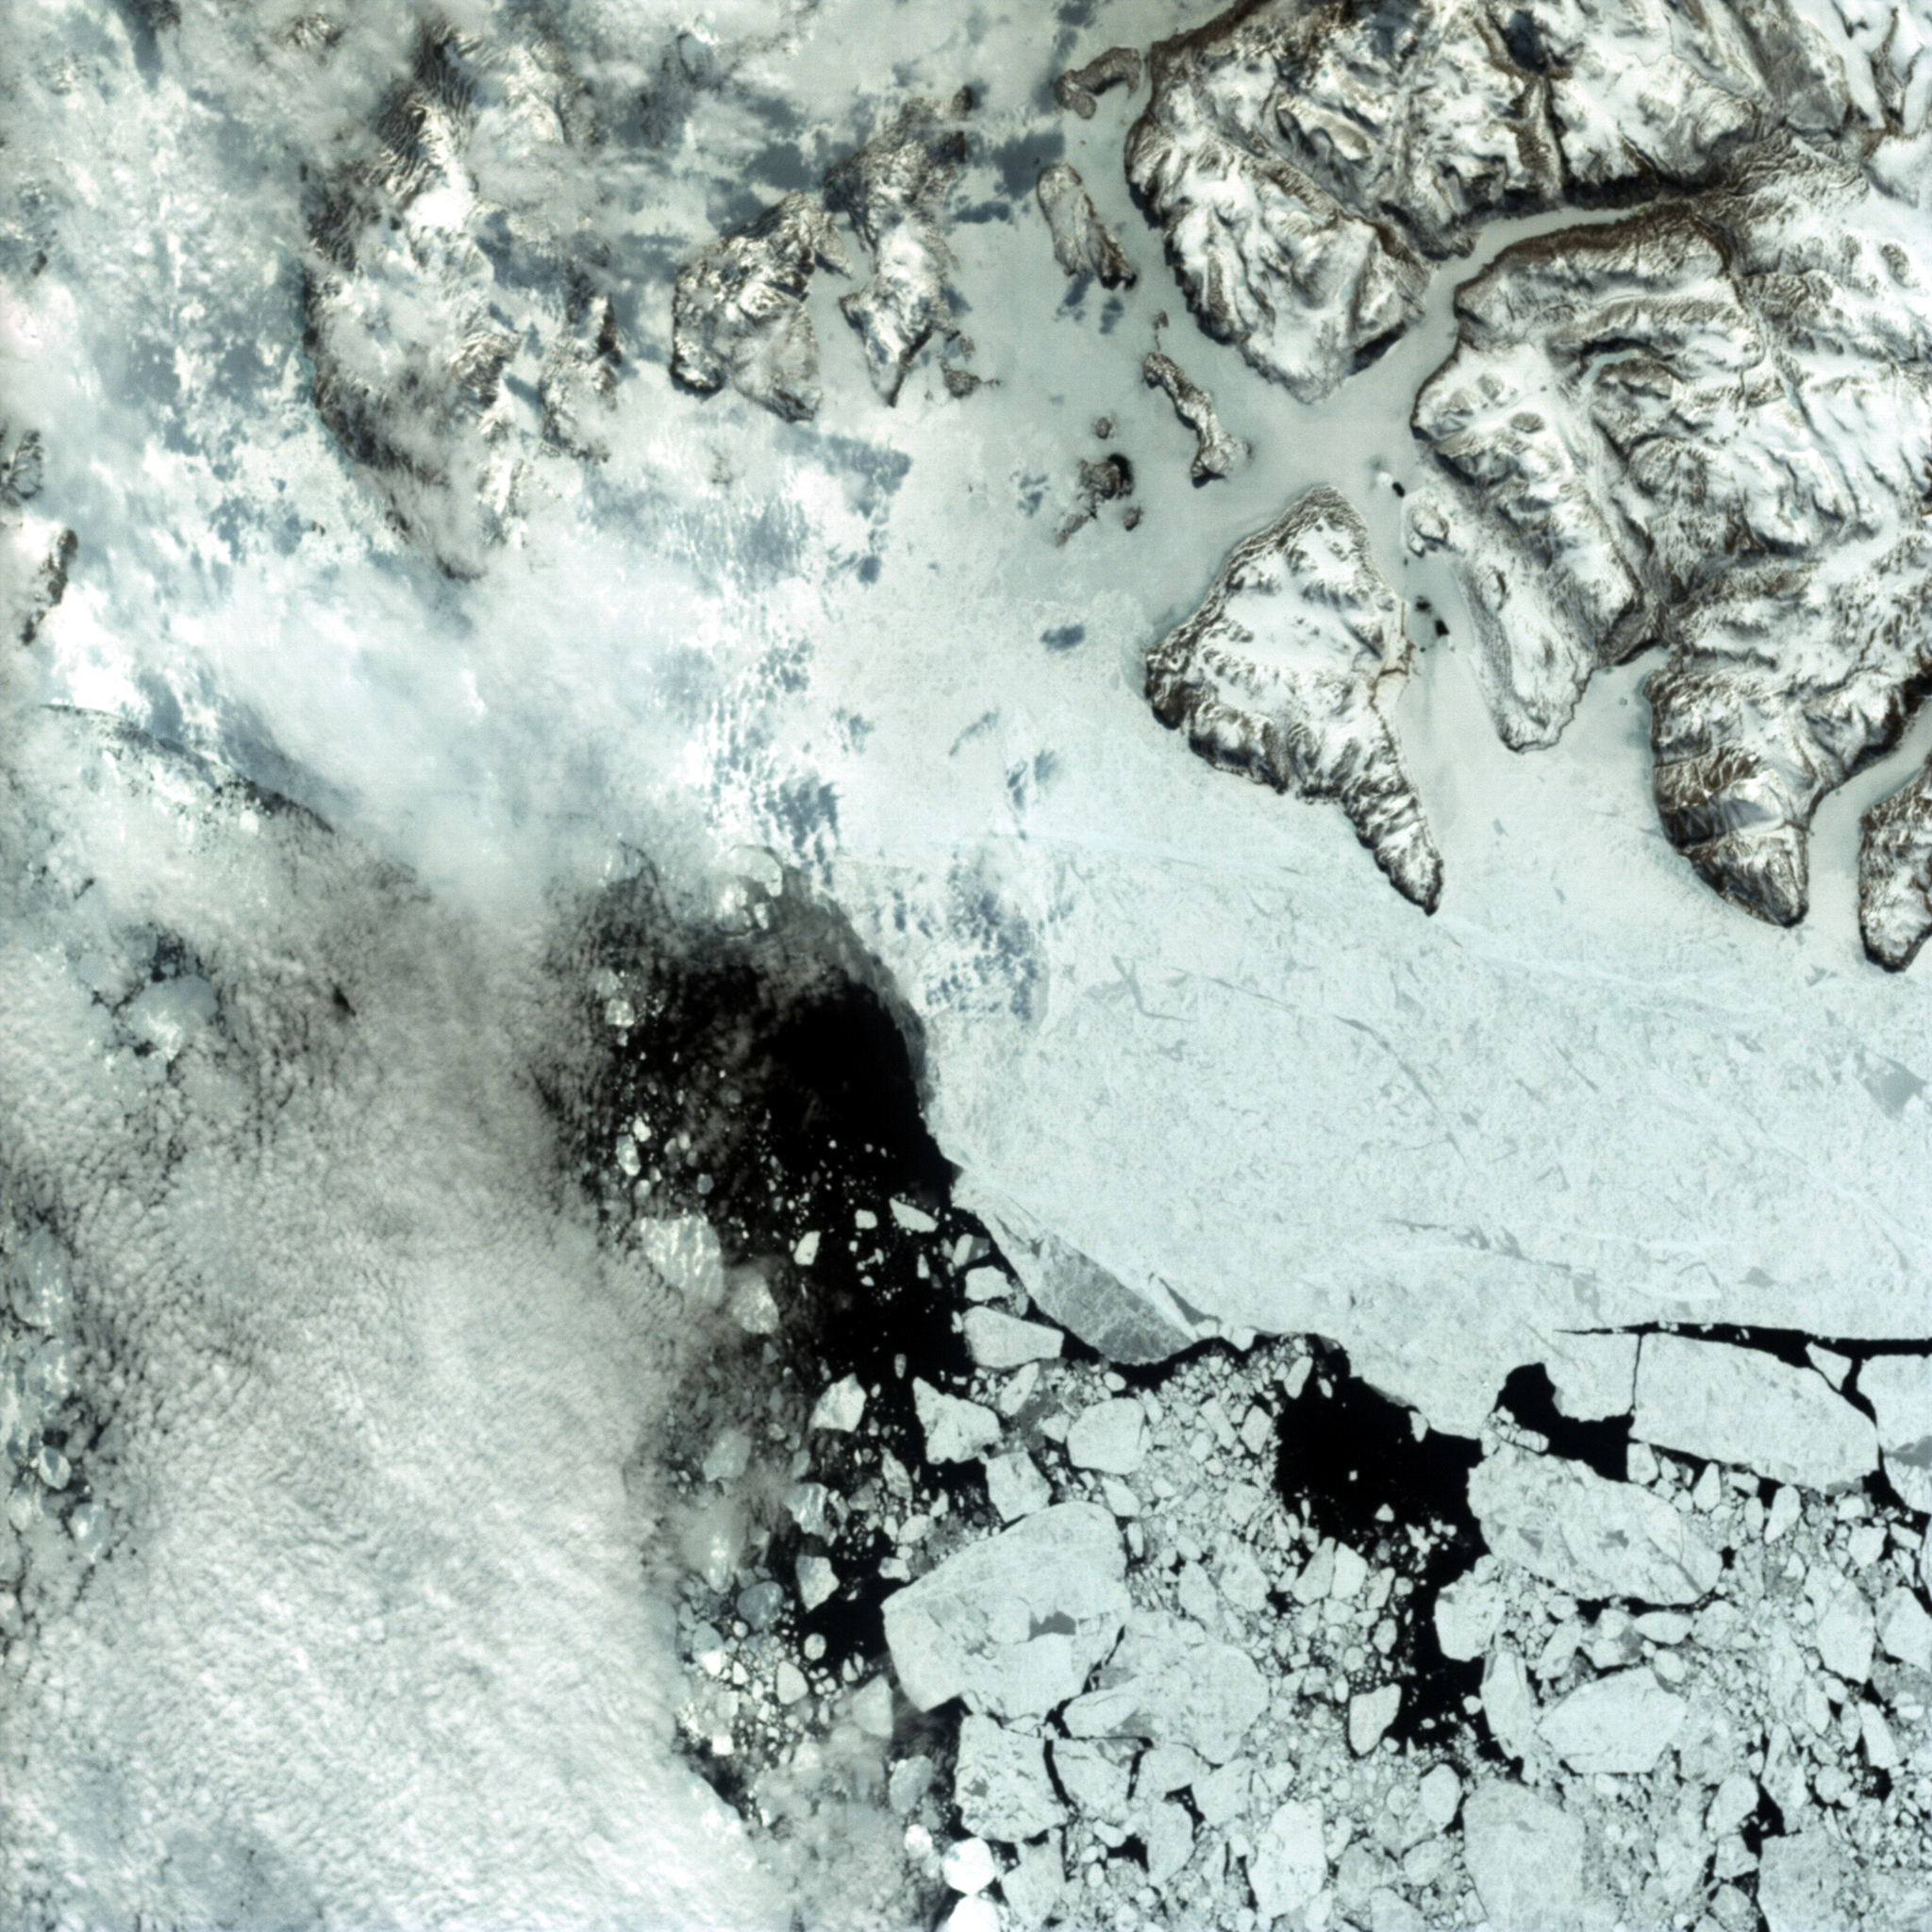 On June 7, AMS took a photo of Baffin Bay near Greenland as part of a project to track ice melting in this area over the summer. 